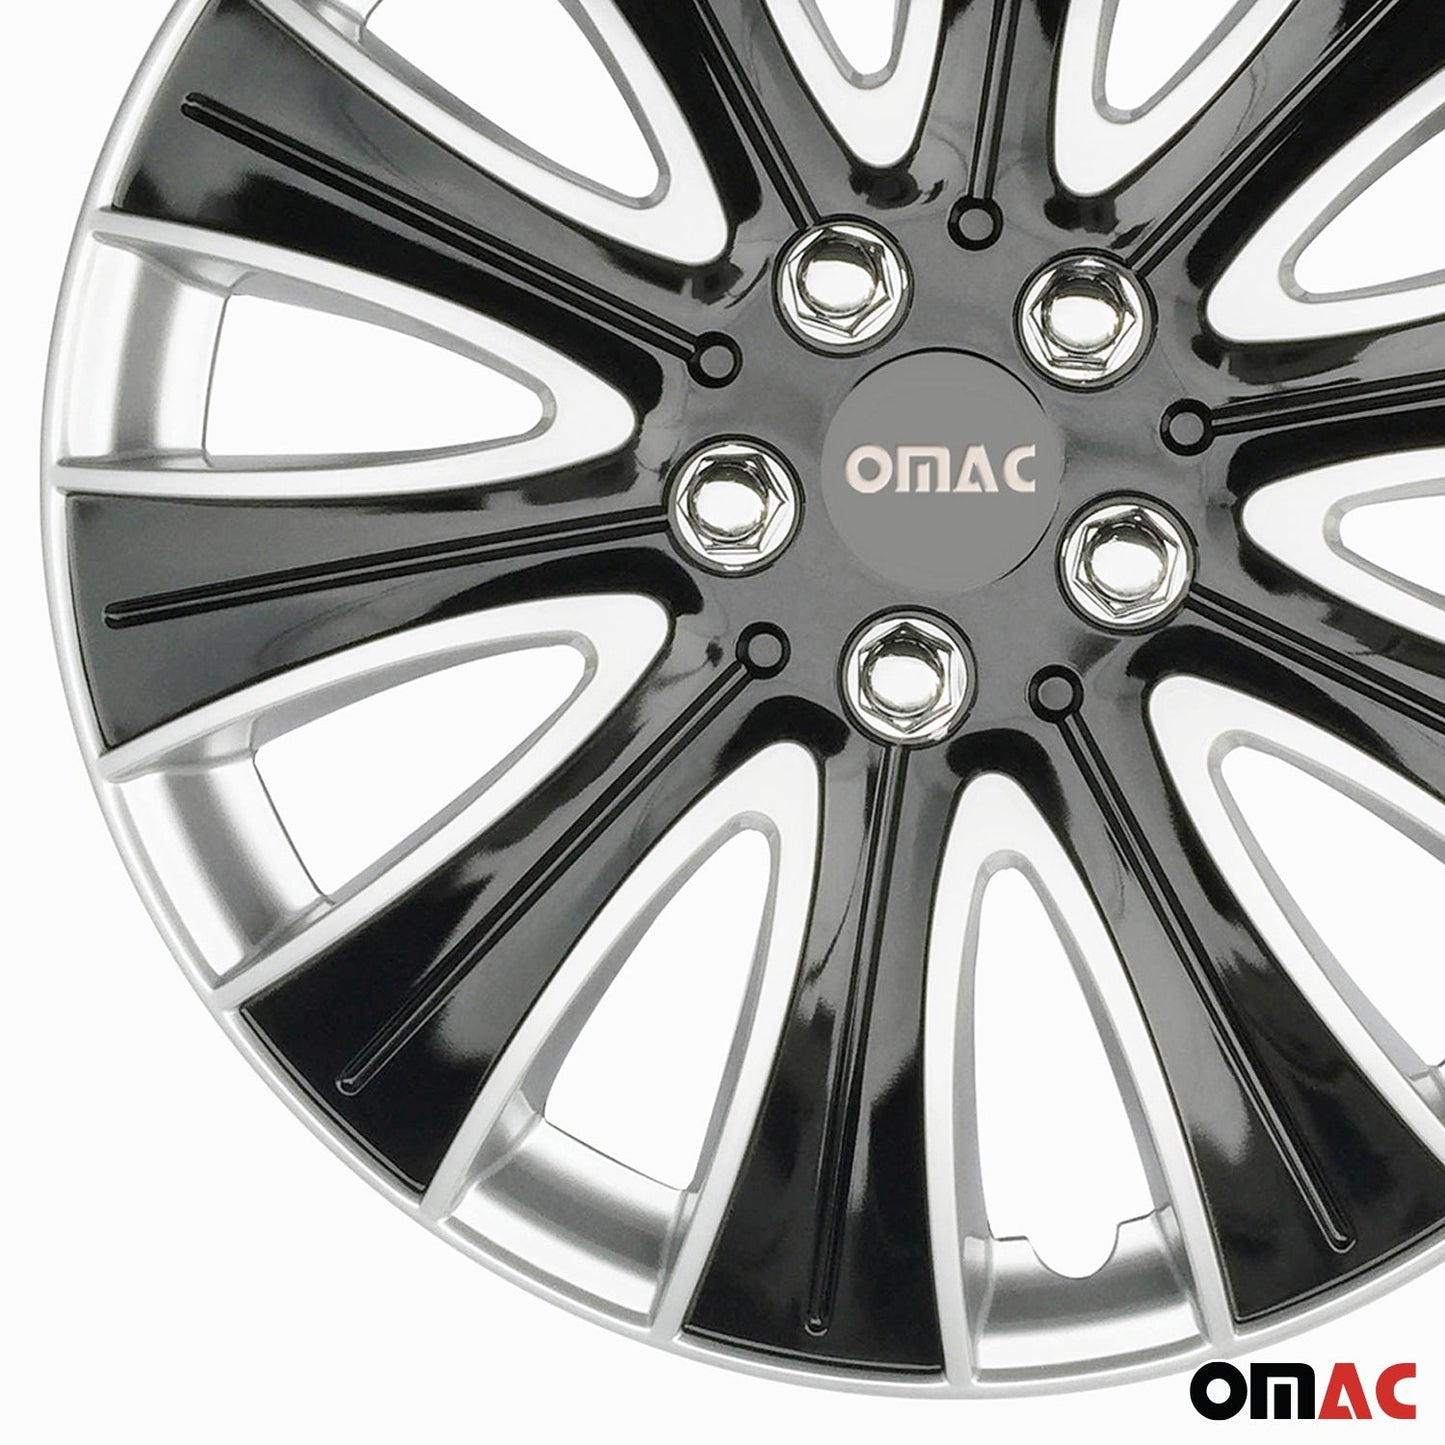 OMAC 16" Wheel Covers Guard Hub Caps Durable Snap On ABS Accessories Black Silver 4x OMAC-WE40-SVBK16